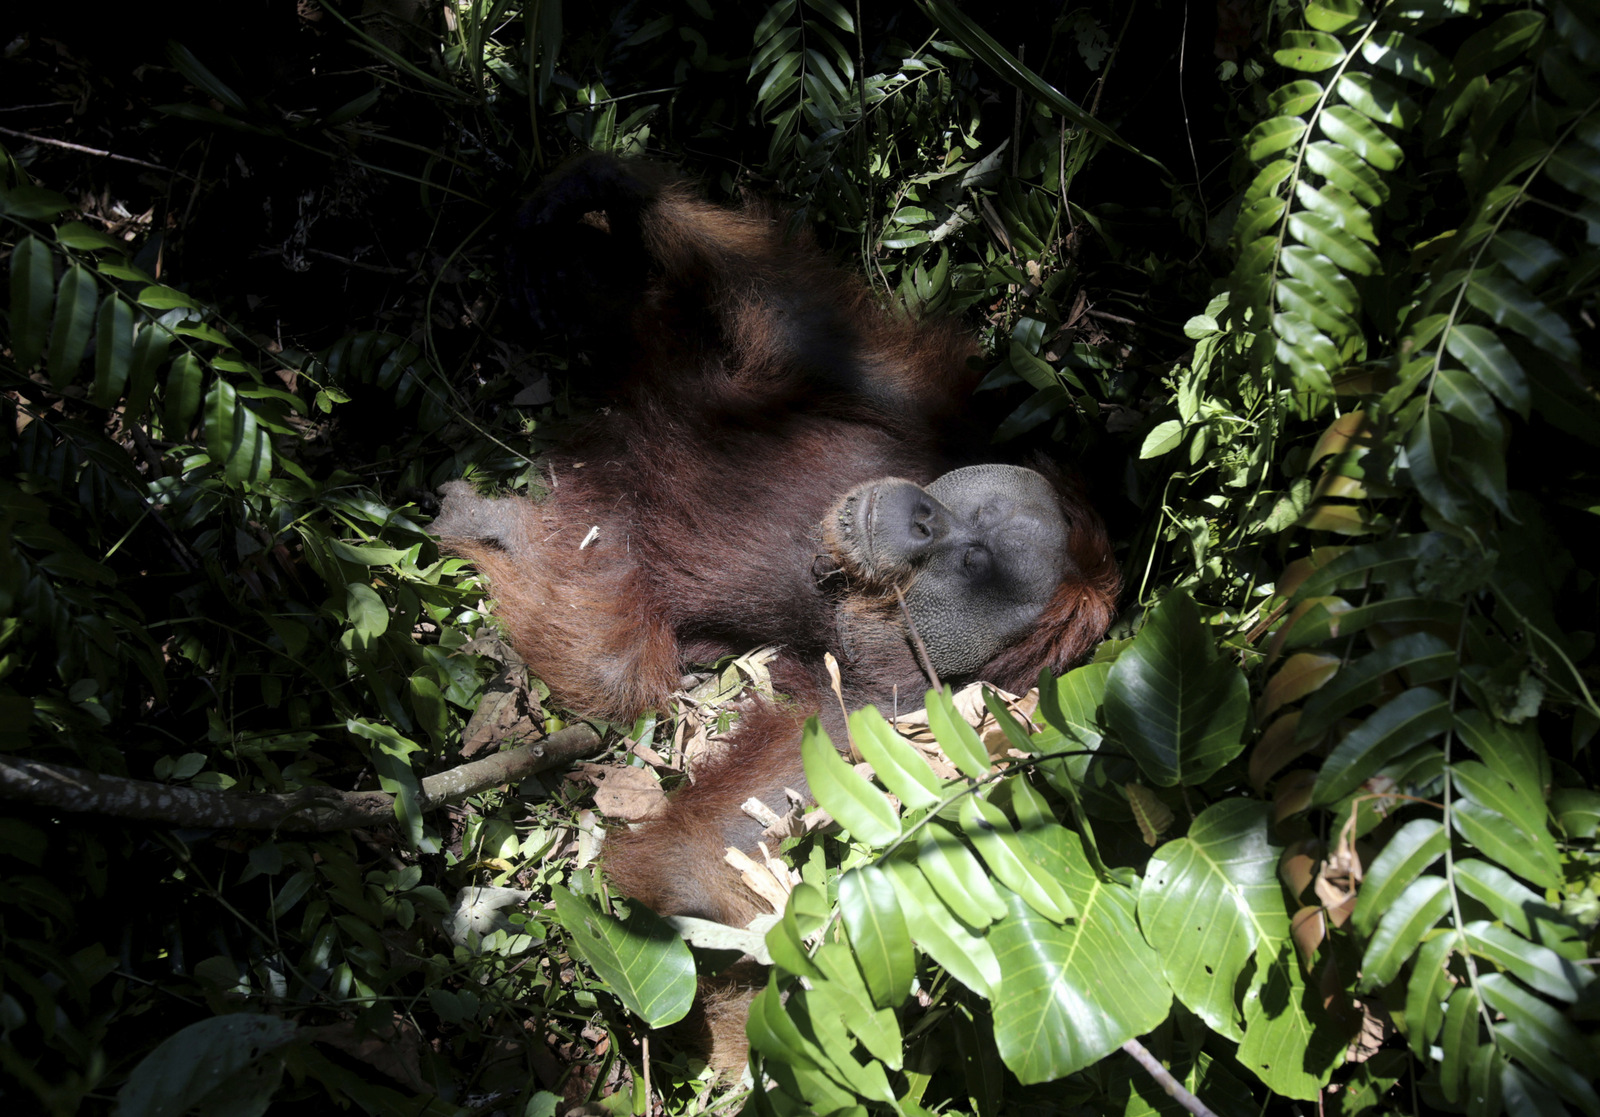 In this Thursday, Aug. 10, 2017 photo, a tranquilized orangutan lays on the ground before being relocated from at a swath of destructed forest near a palm oil plantation at Tripa peat swamp in Aceh province, Indonesia. It’s been called the orangutan capital of the world, but the great apes in Indonesia’s Tripa peat forest on the island of Sumatra are under threat by palm oil plantations that have gobbled up thousands of acres of land to make room for trees that produce the most consumed vegetable oil on the planet.(AP Photo/Binsar Bakkara)